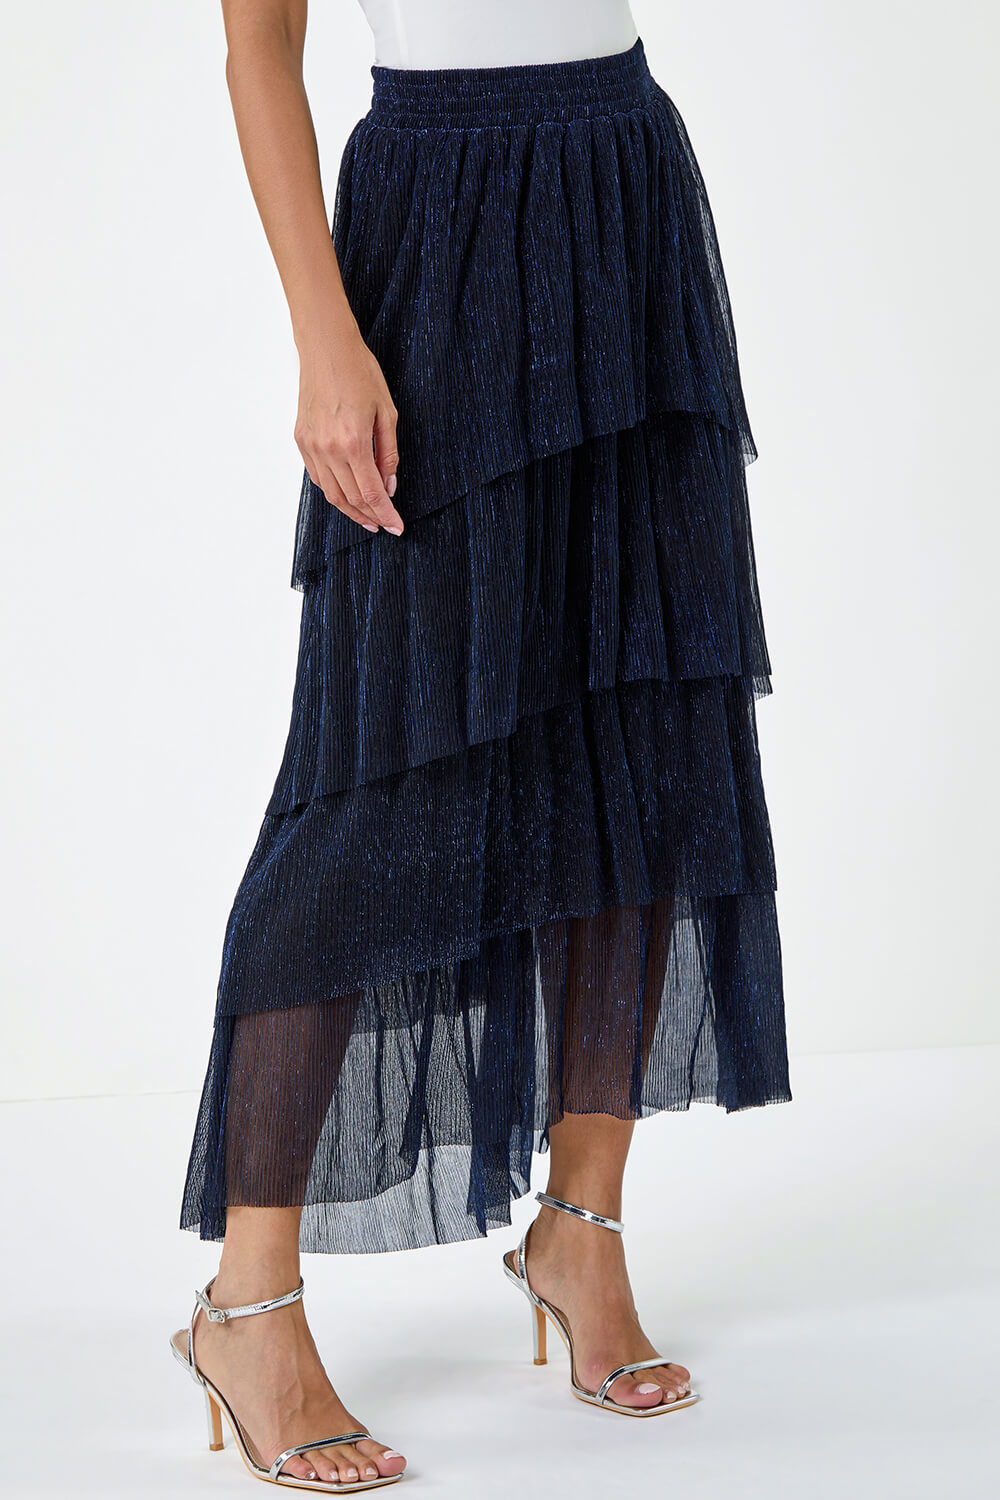 Midnight Blue Shimmer Tiered Mesh Maxi Skirt, Image 5 of 5